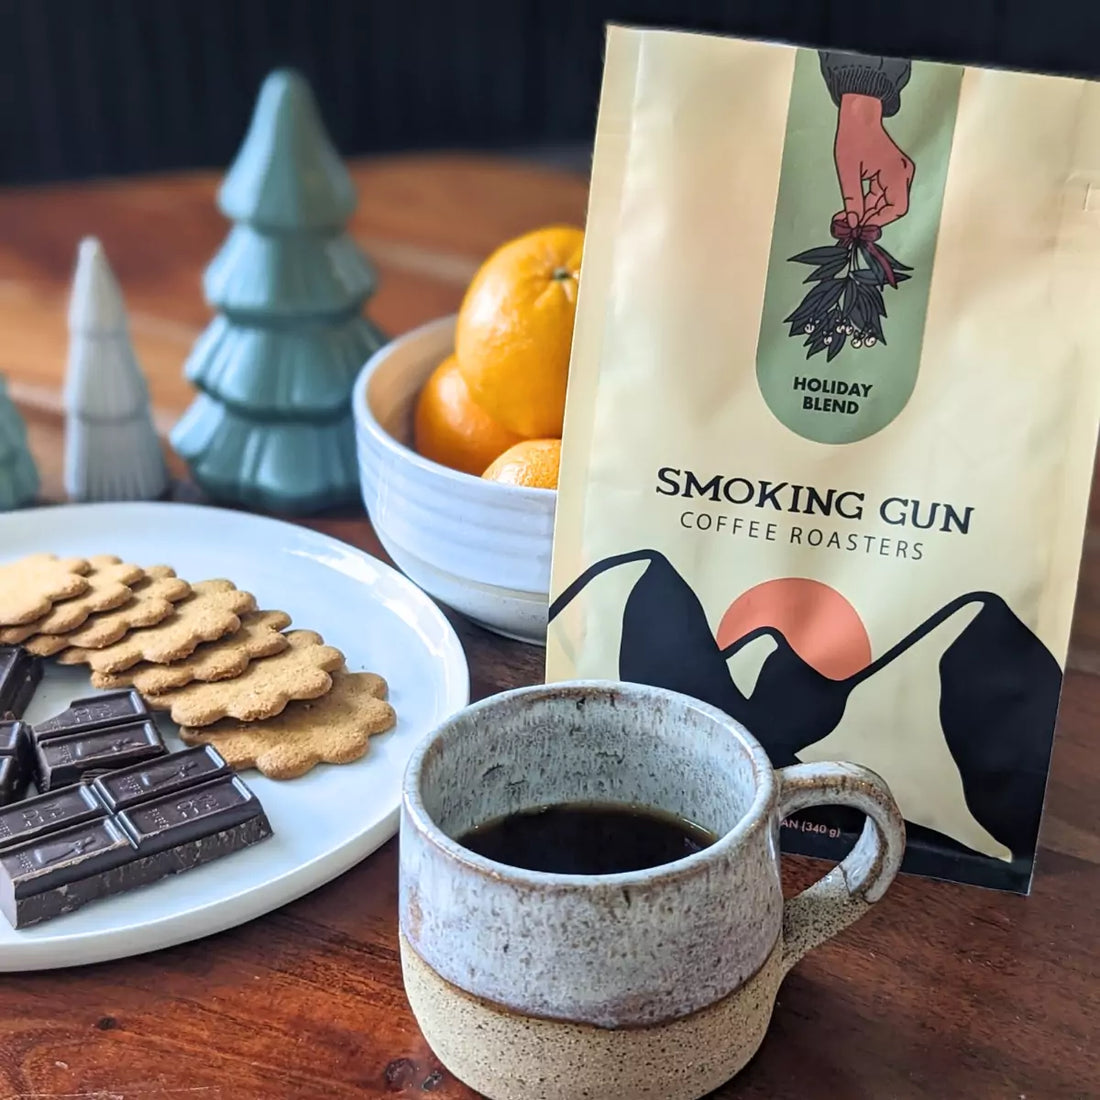 Sip your way into the Holidays with Smoking Gun Coffee's Holiday Blend